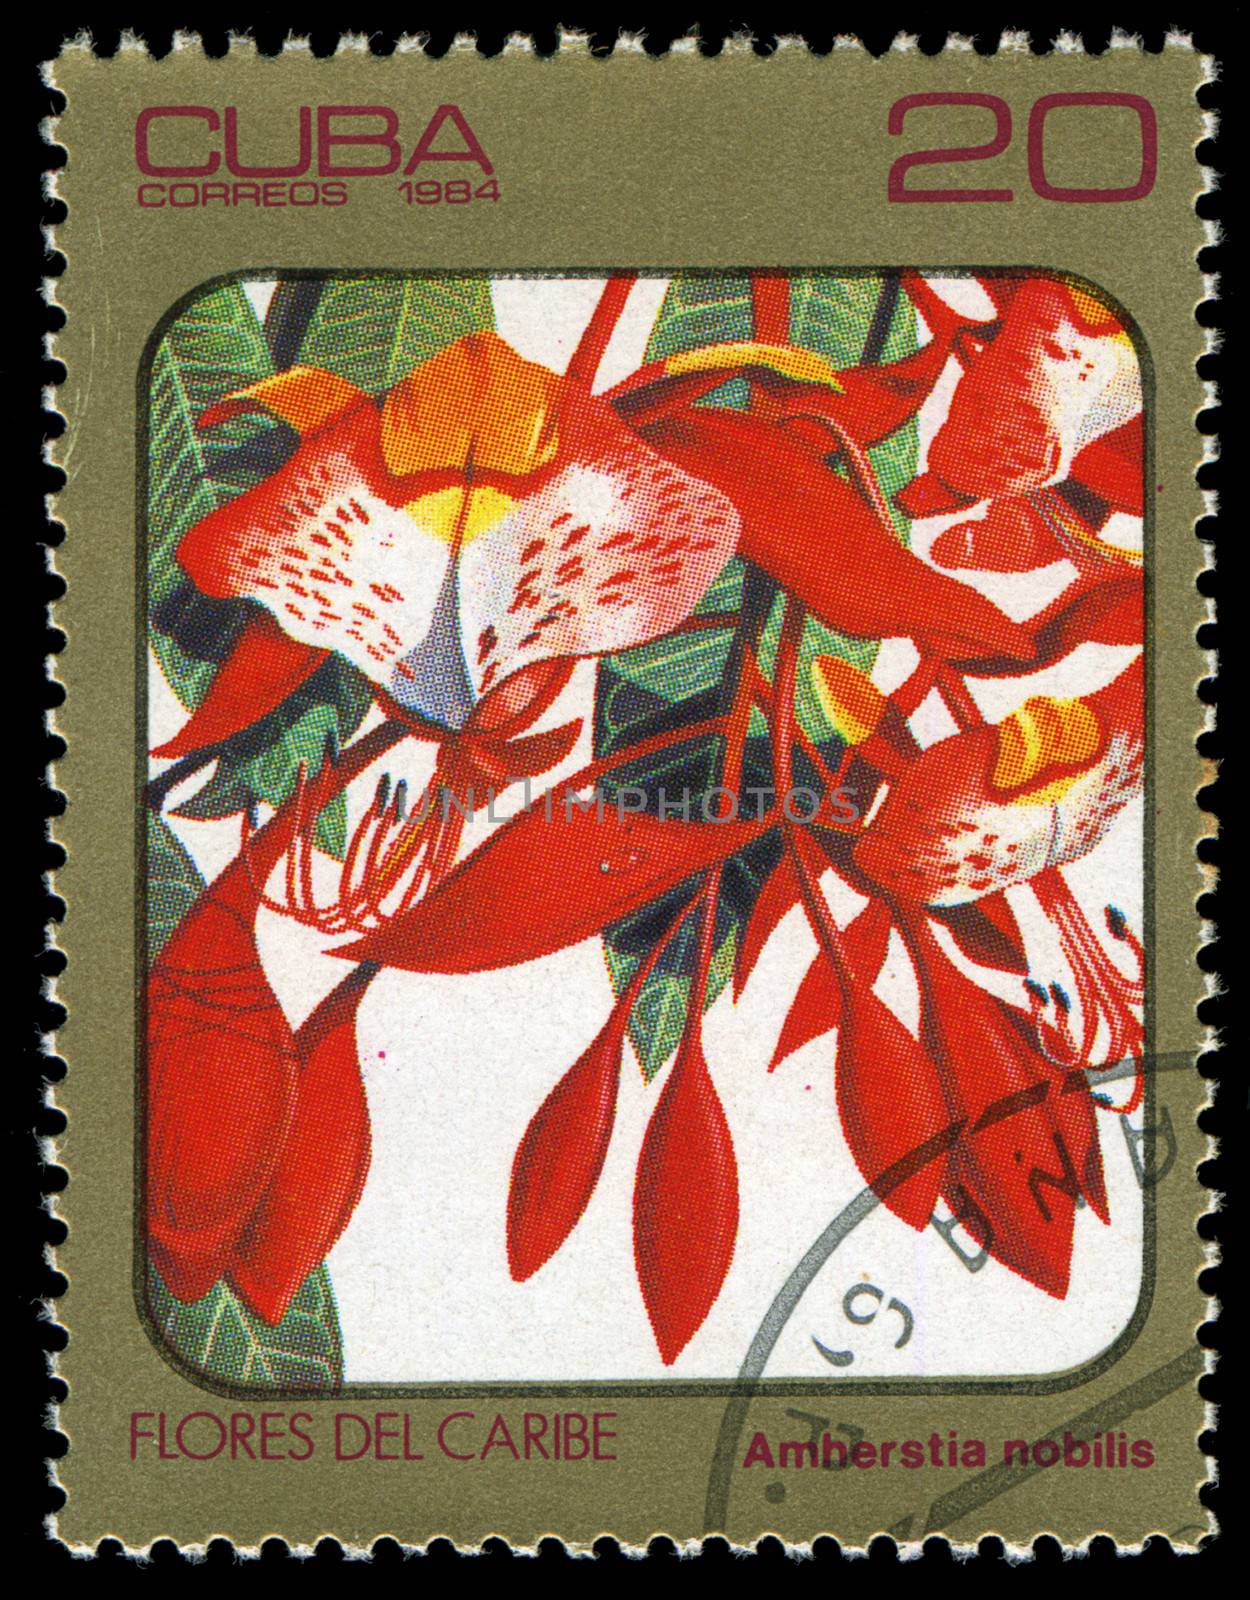 CUBA - CIRCA 1984: post stamp printed in Cuba shows image of amherstia nobilis from Caribbean flowers series, Scott catalog 2690 A730 20c, circa 1984 by Zhukow